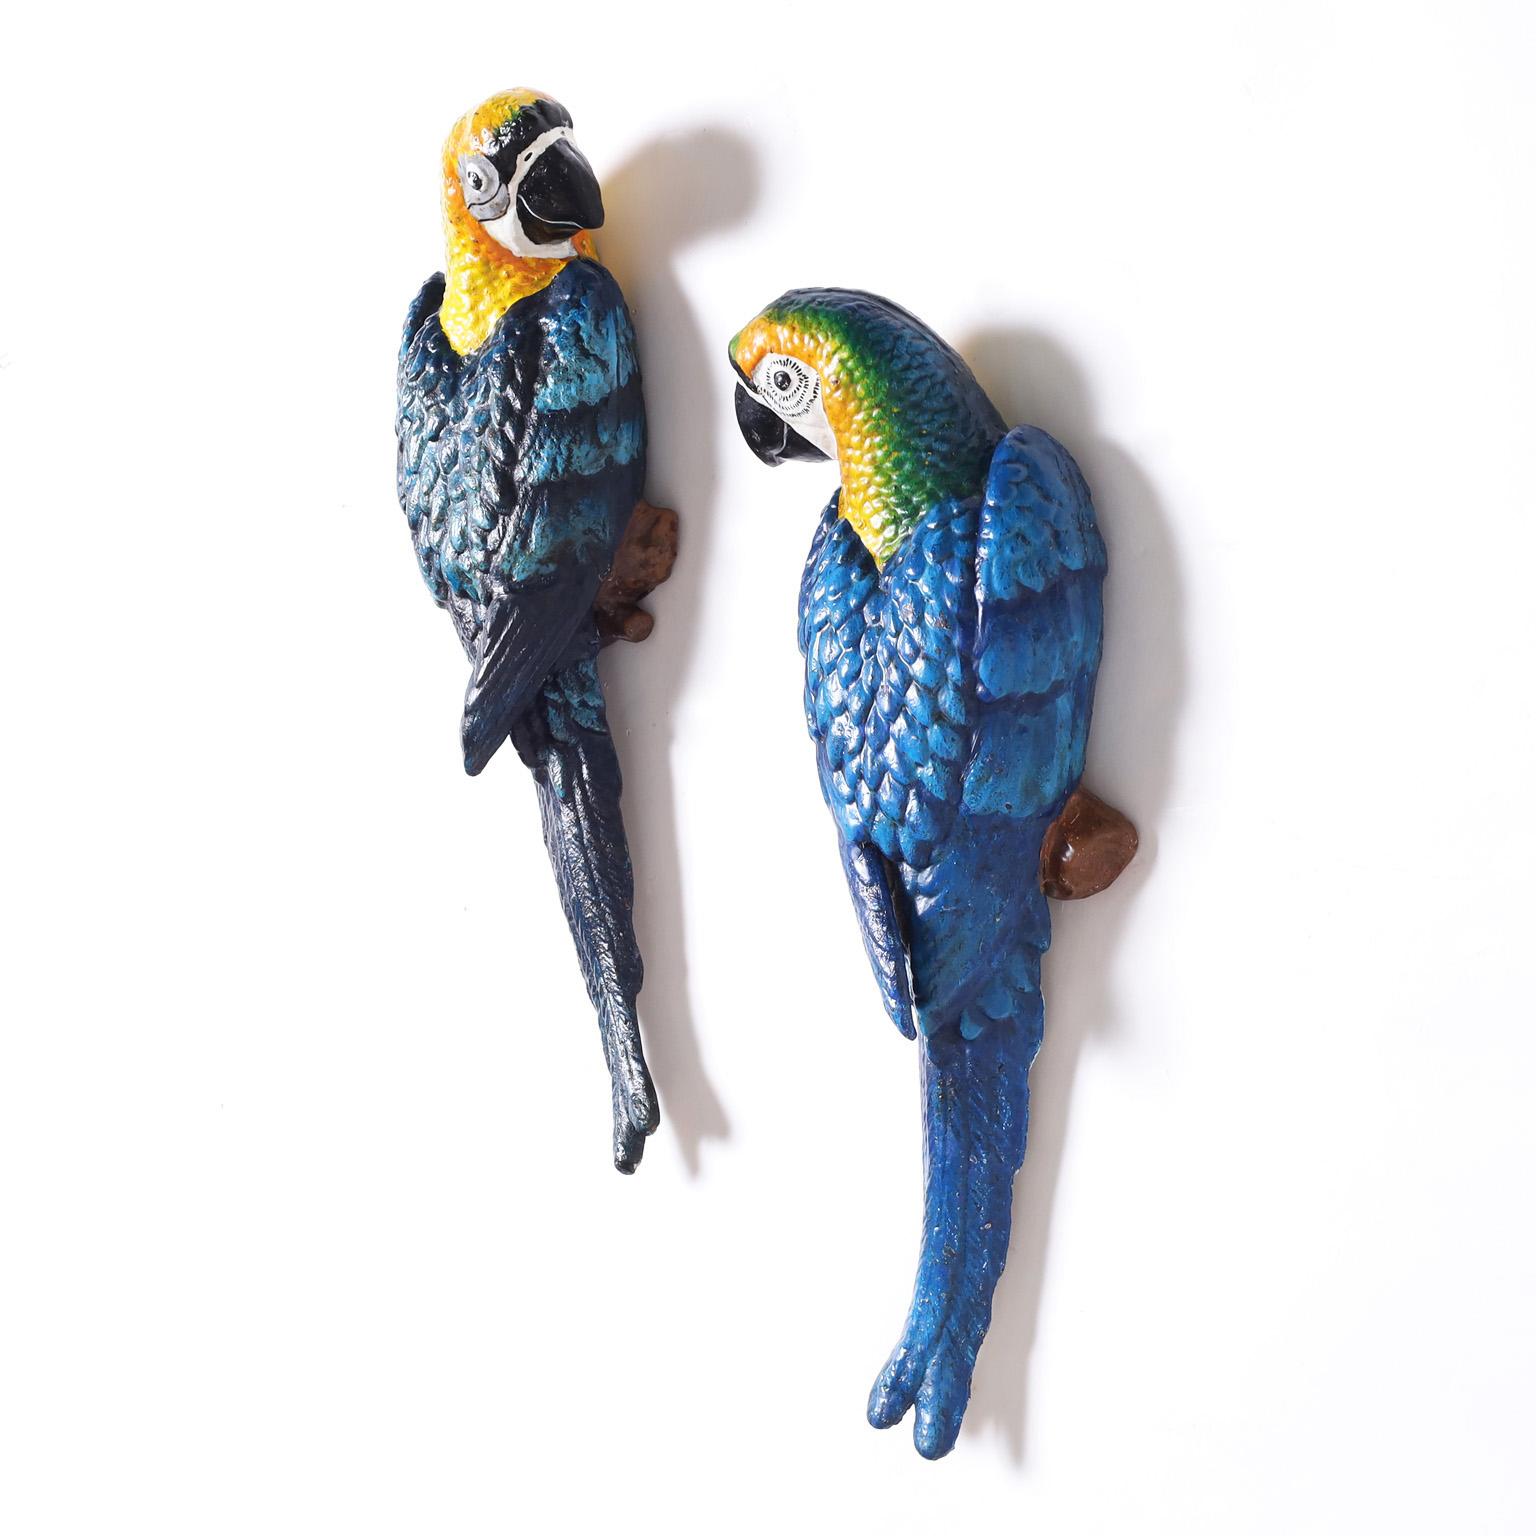 Striking pair of vintage life-size parrot wall hanging sculptures crafted in cast iron and painted in tropical colors now slightly oxidized. 